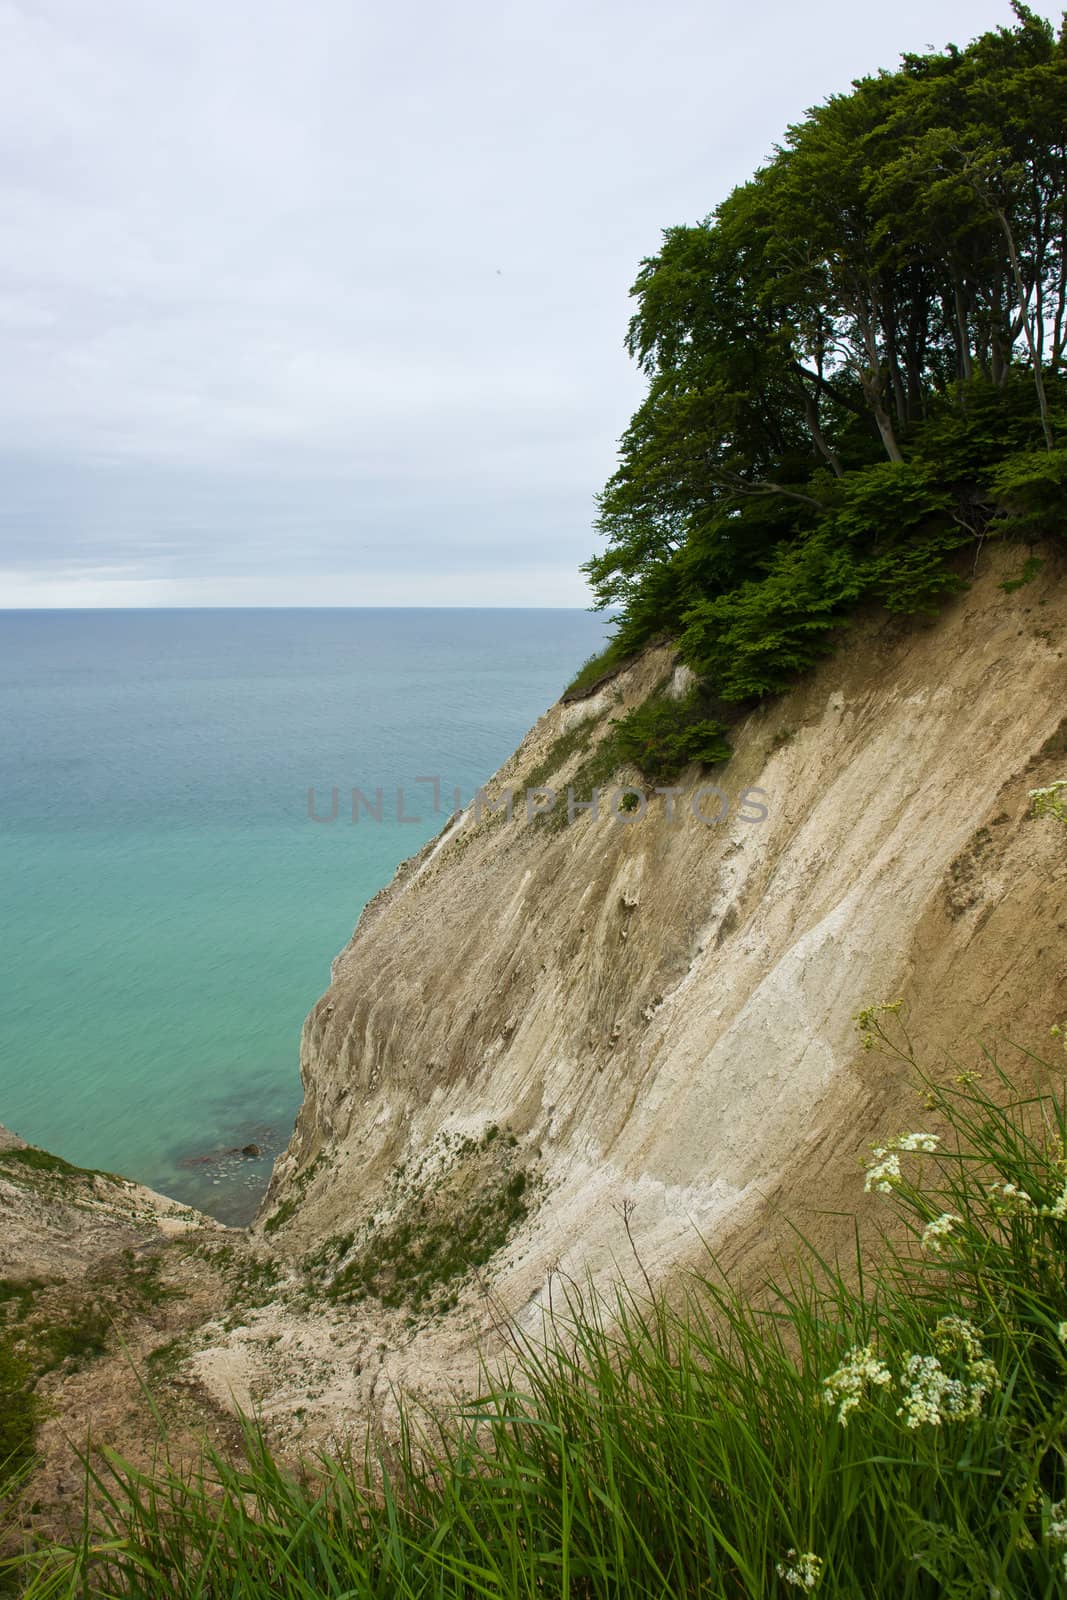 The White Cliffs of Moen Denmark nature attraction by the Baltic Sea